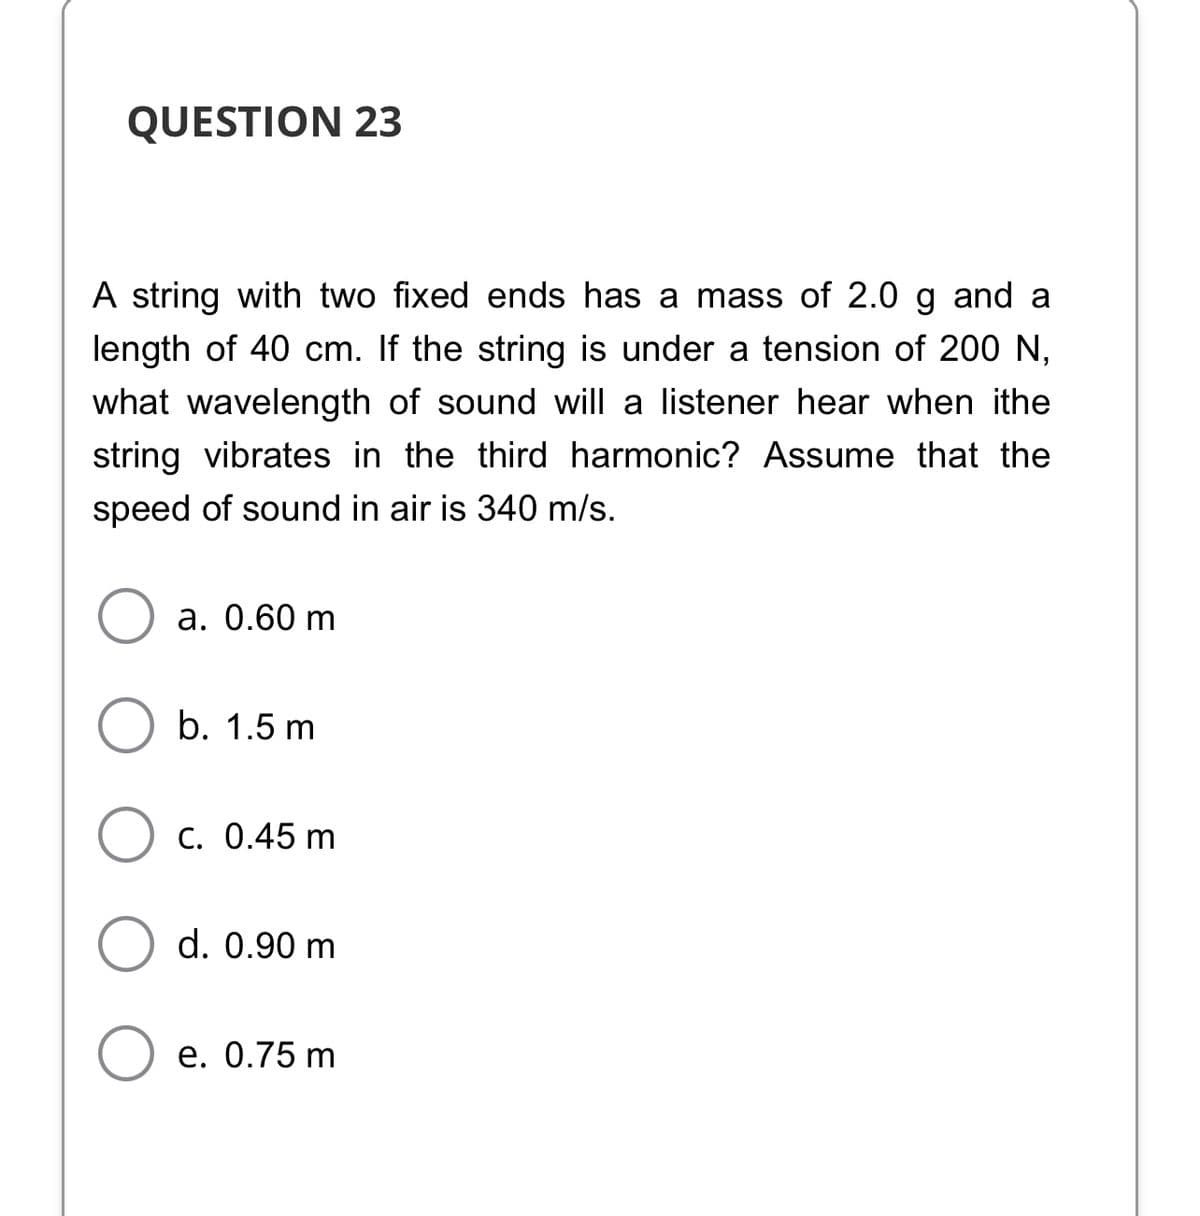 QUESTION 23
A string with two fixed ends has a mass of 2.0 g and a
length of 40 cm. If the string is under a tension of 200 N,
what wavelength of sound will a listener hear when ithe
string vibrates in the third harmonic? Assume that the
speed of sound in air is 340 m/s.
a. 0.60 m
b. 1.5 m
C. 0.45 m
d. 0.90 m
e. 0.75 m
